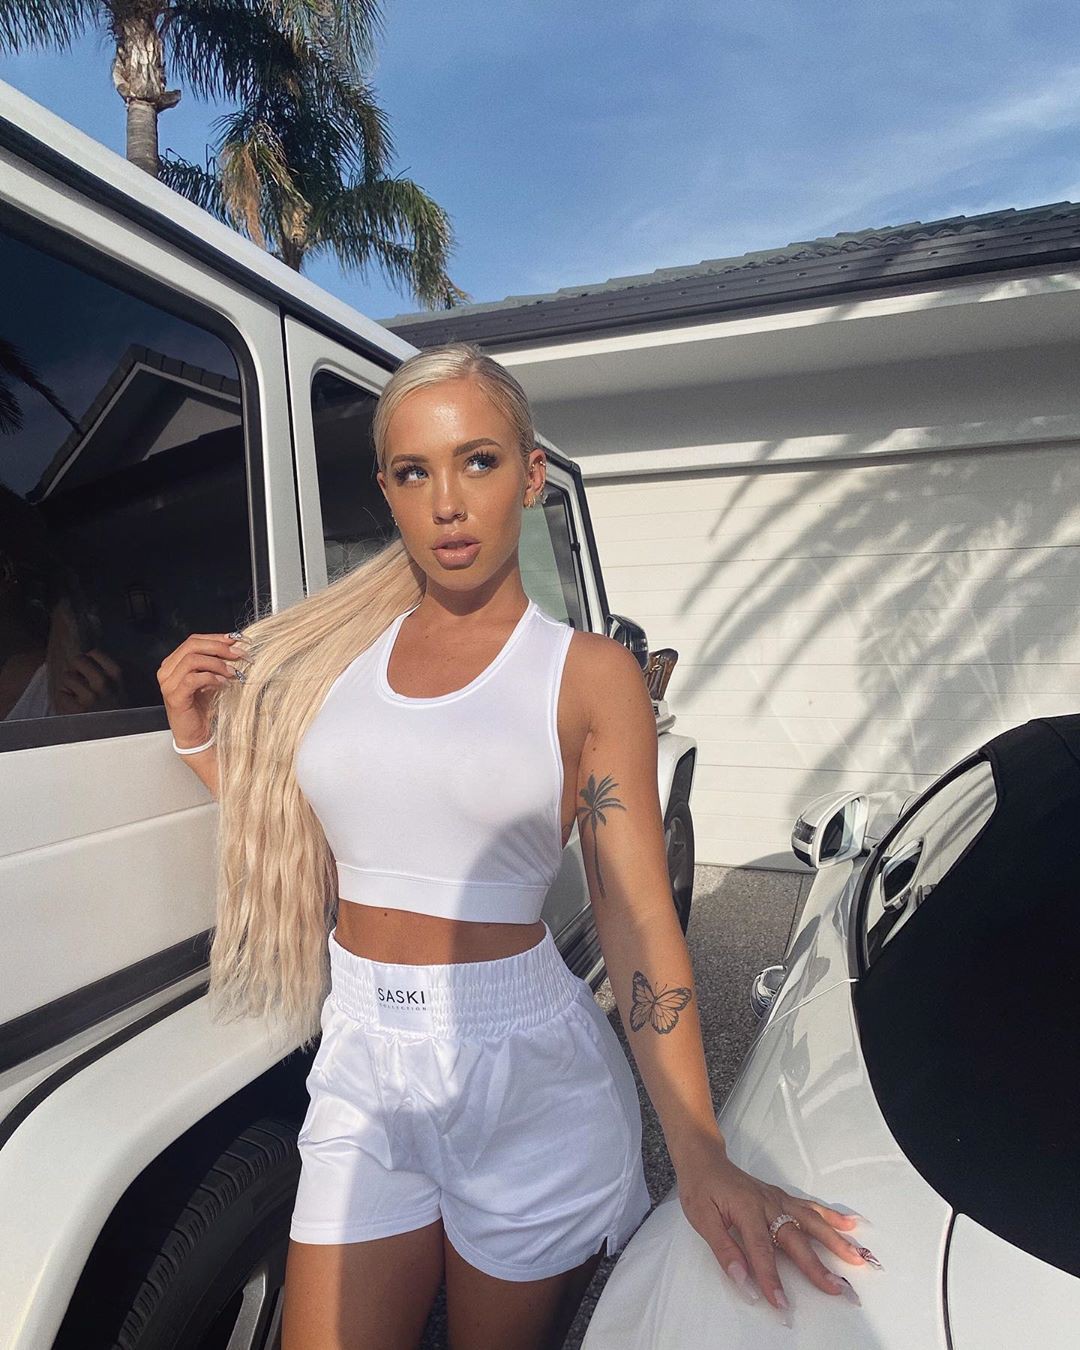 Sexy Instagram Pic of Diva Tammy Hembrow: Hot Instagram Models,  Hot Beauty,  Model Tammy Hembrow,  Hot Insta Pics,  Tammy Hembrow  